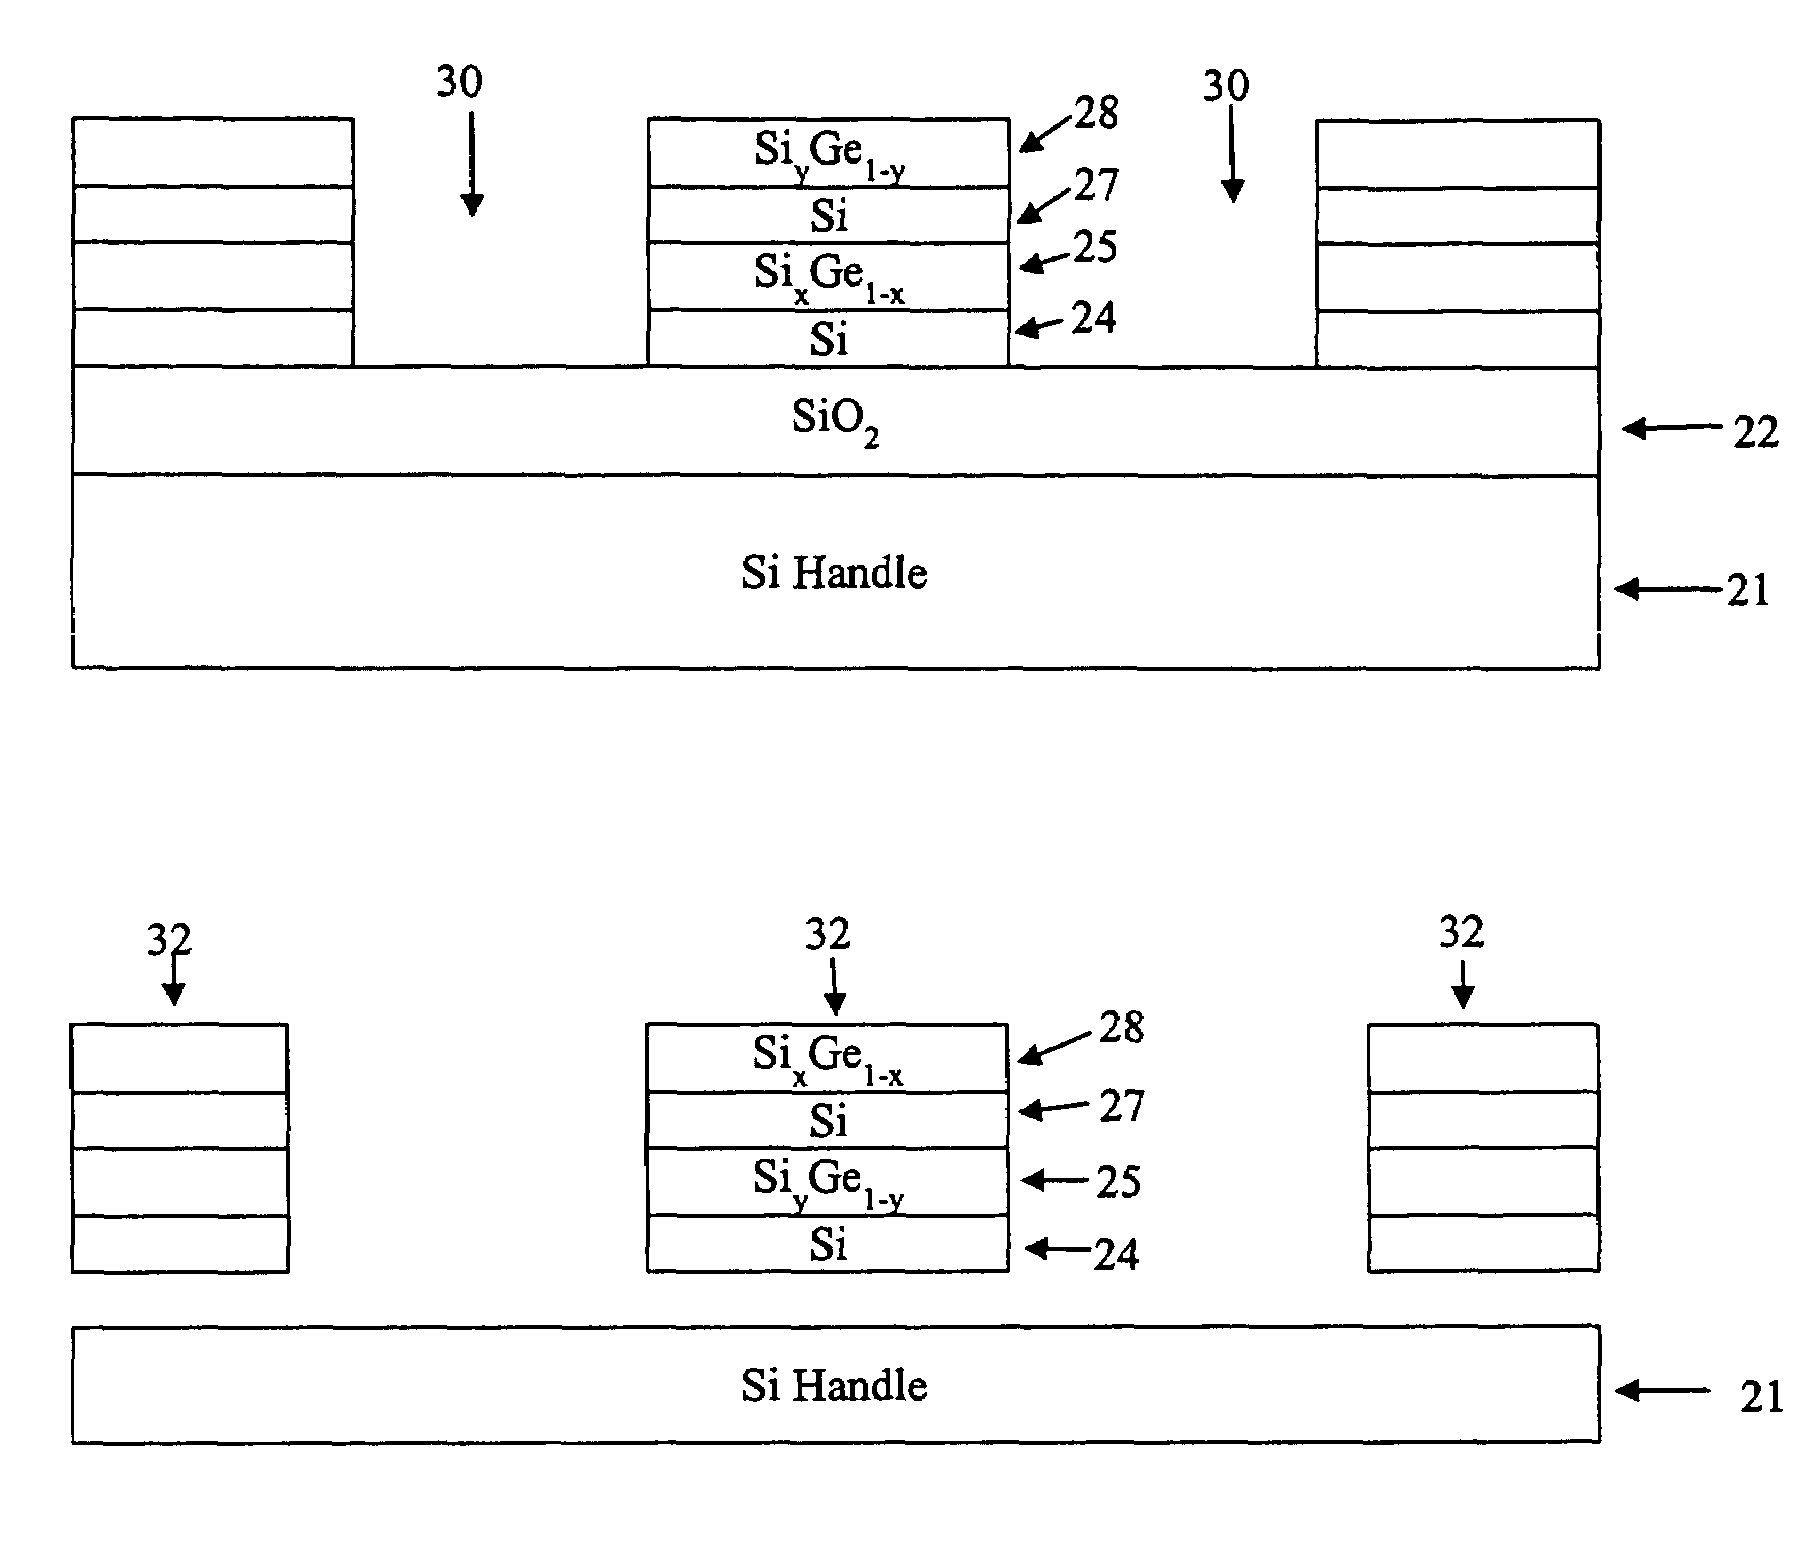 Fabrication of strained heterojunction structures